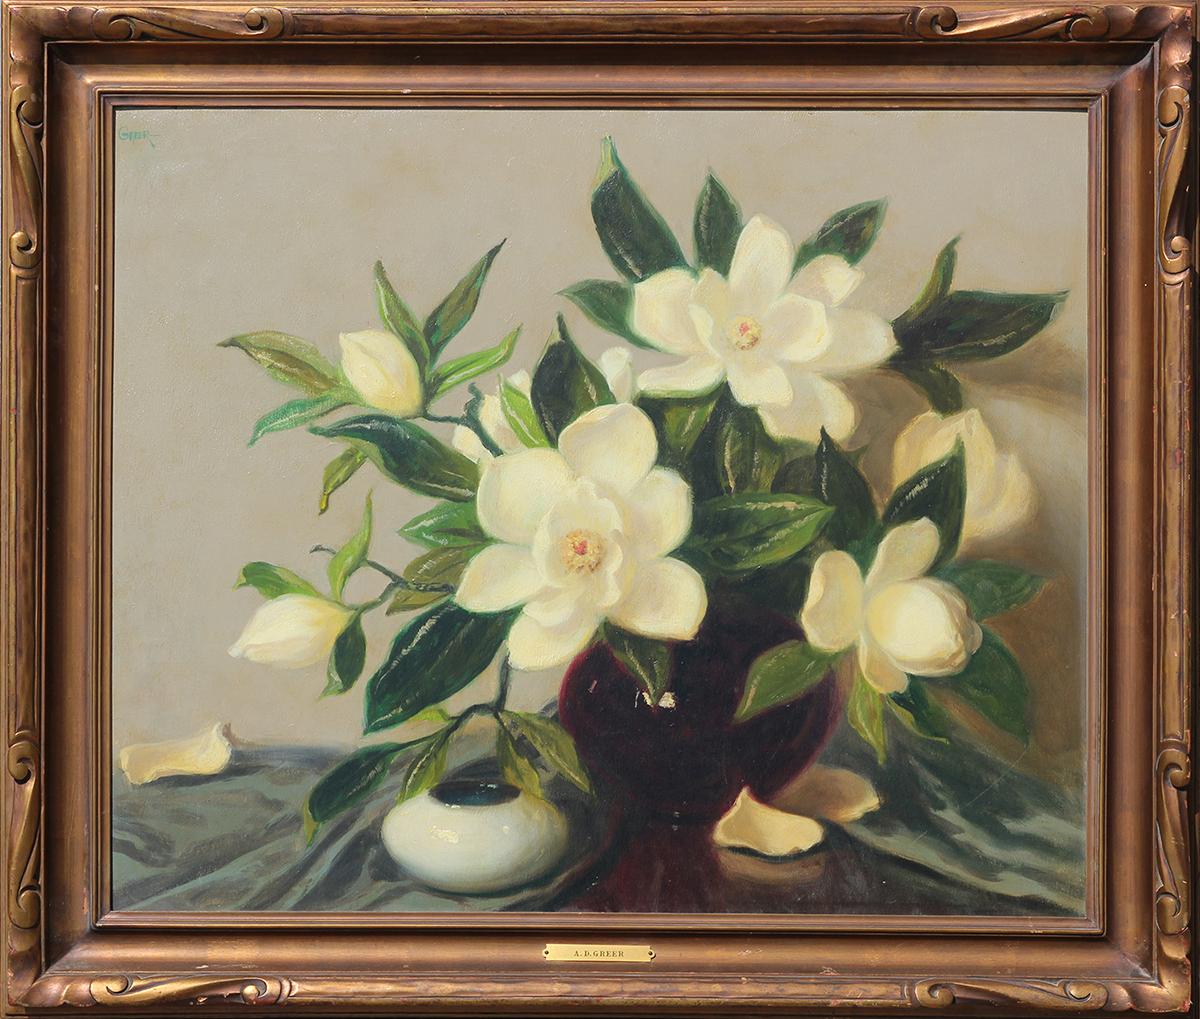 A.D. Greer Figurative Painting - Green and White Realistic Magnolia Flowers Interior Still Life